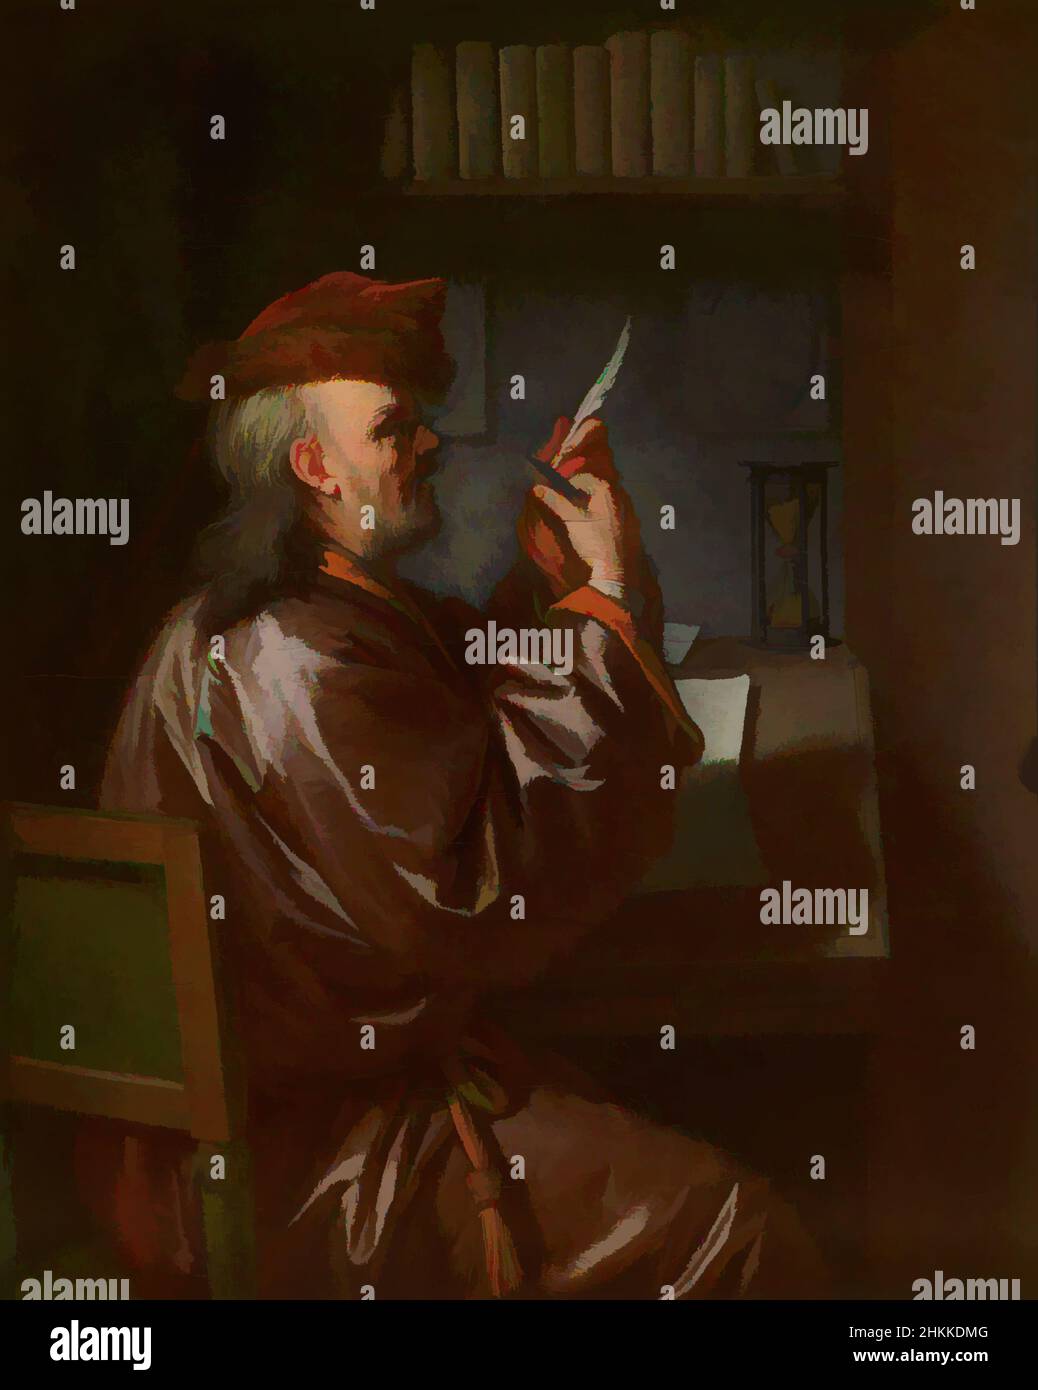 Art inspired by The accountant, Philip van Dijk, c. 1720 - 1730, Classic works modernized by Artotop with a splash of modernity. Shapes, color and value, eye-catching visual impact on art. Emotions through freedom of artworks in a contemporary way. A timeless message pursuing a wildly creative new direction. Artists turning to the digital medium and creating the Artotop NFT Stock Photo